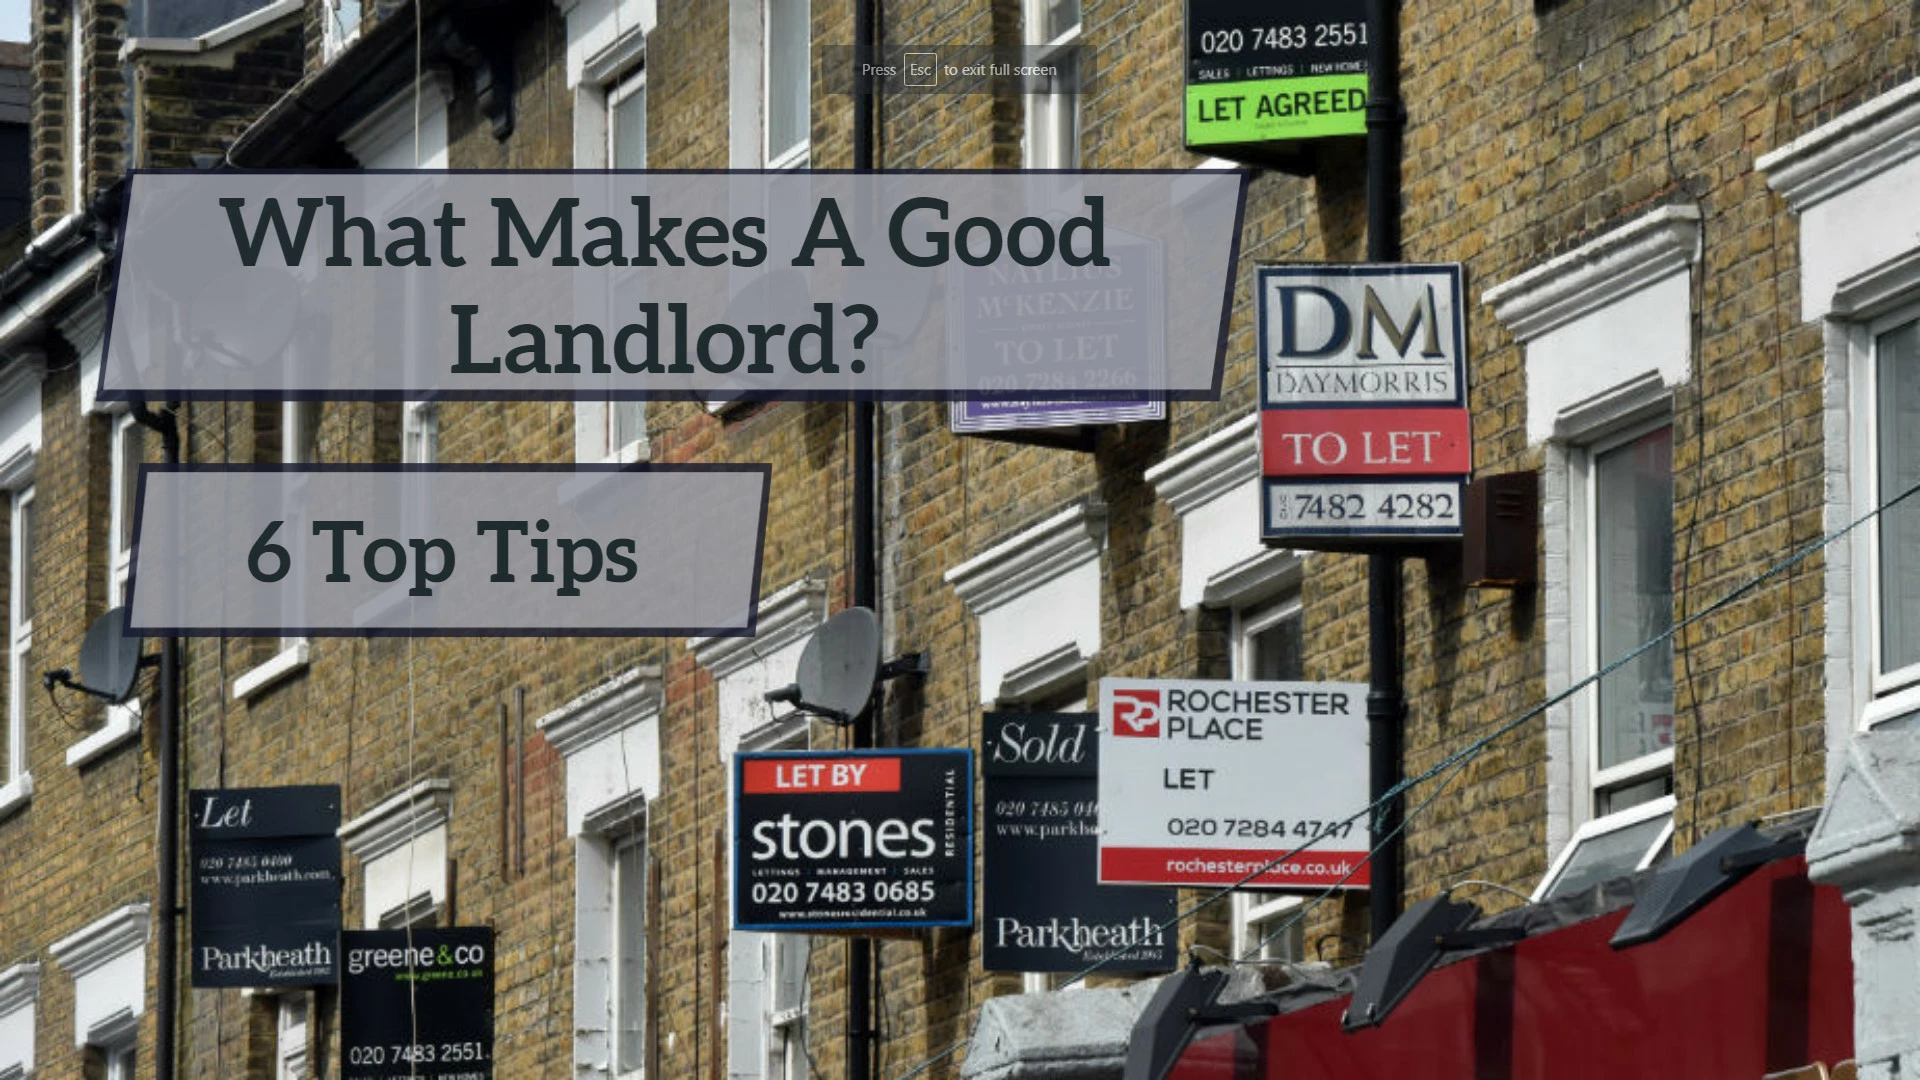 What Makes a good landlord